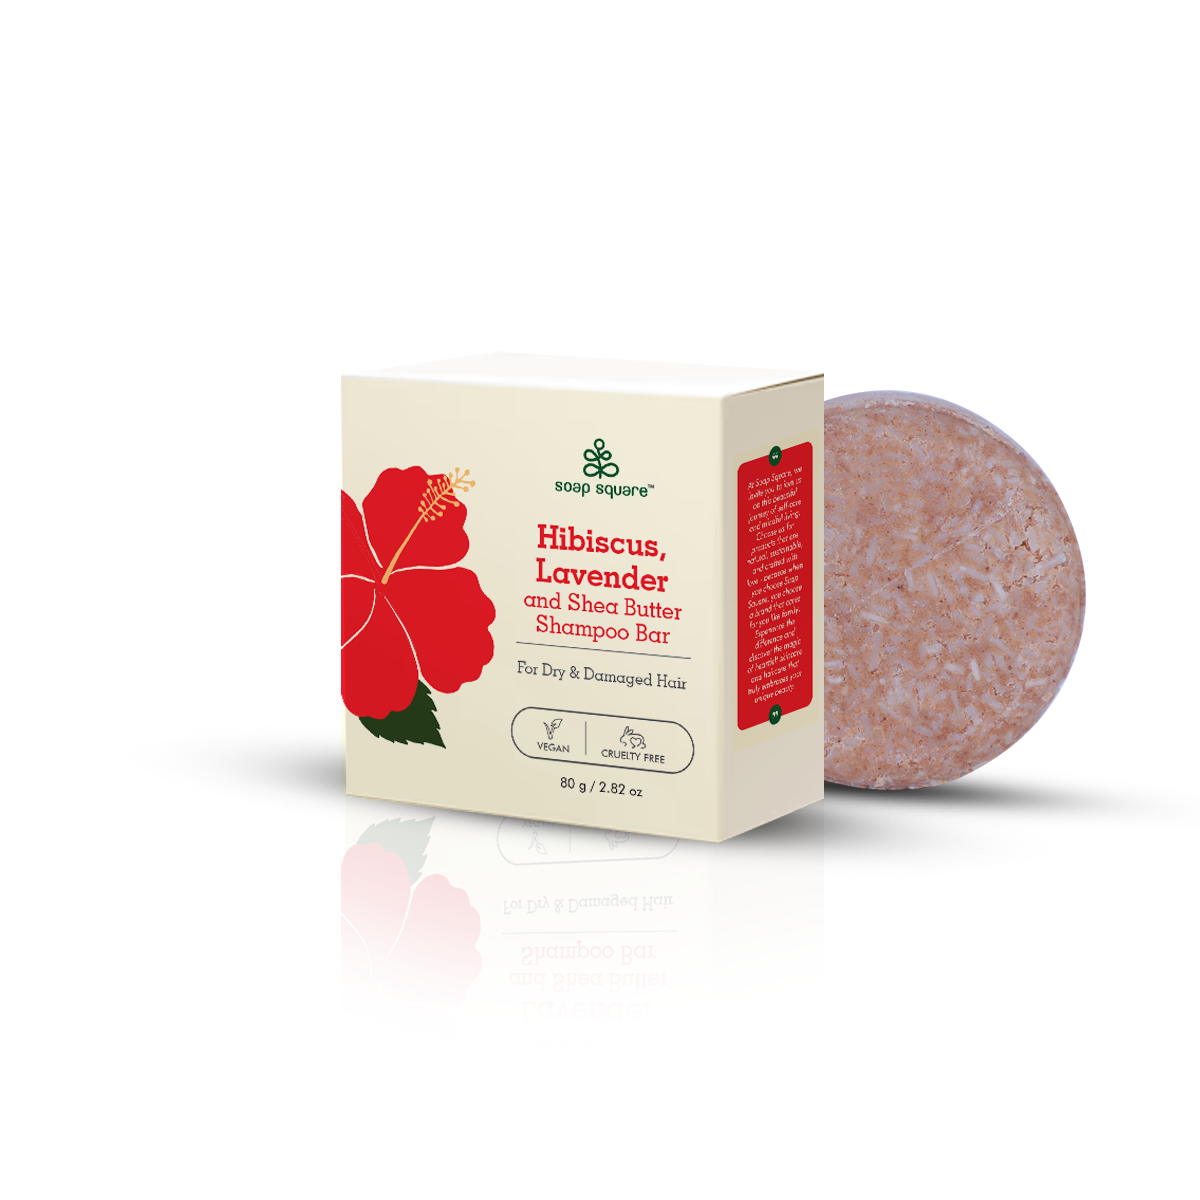 Hibiscus, Lavender & Shea Butter Shampoo Bar (for dry & damaged hair)